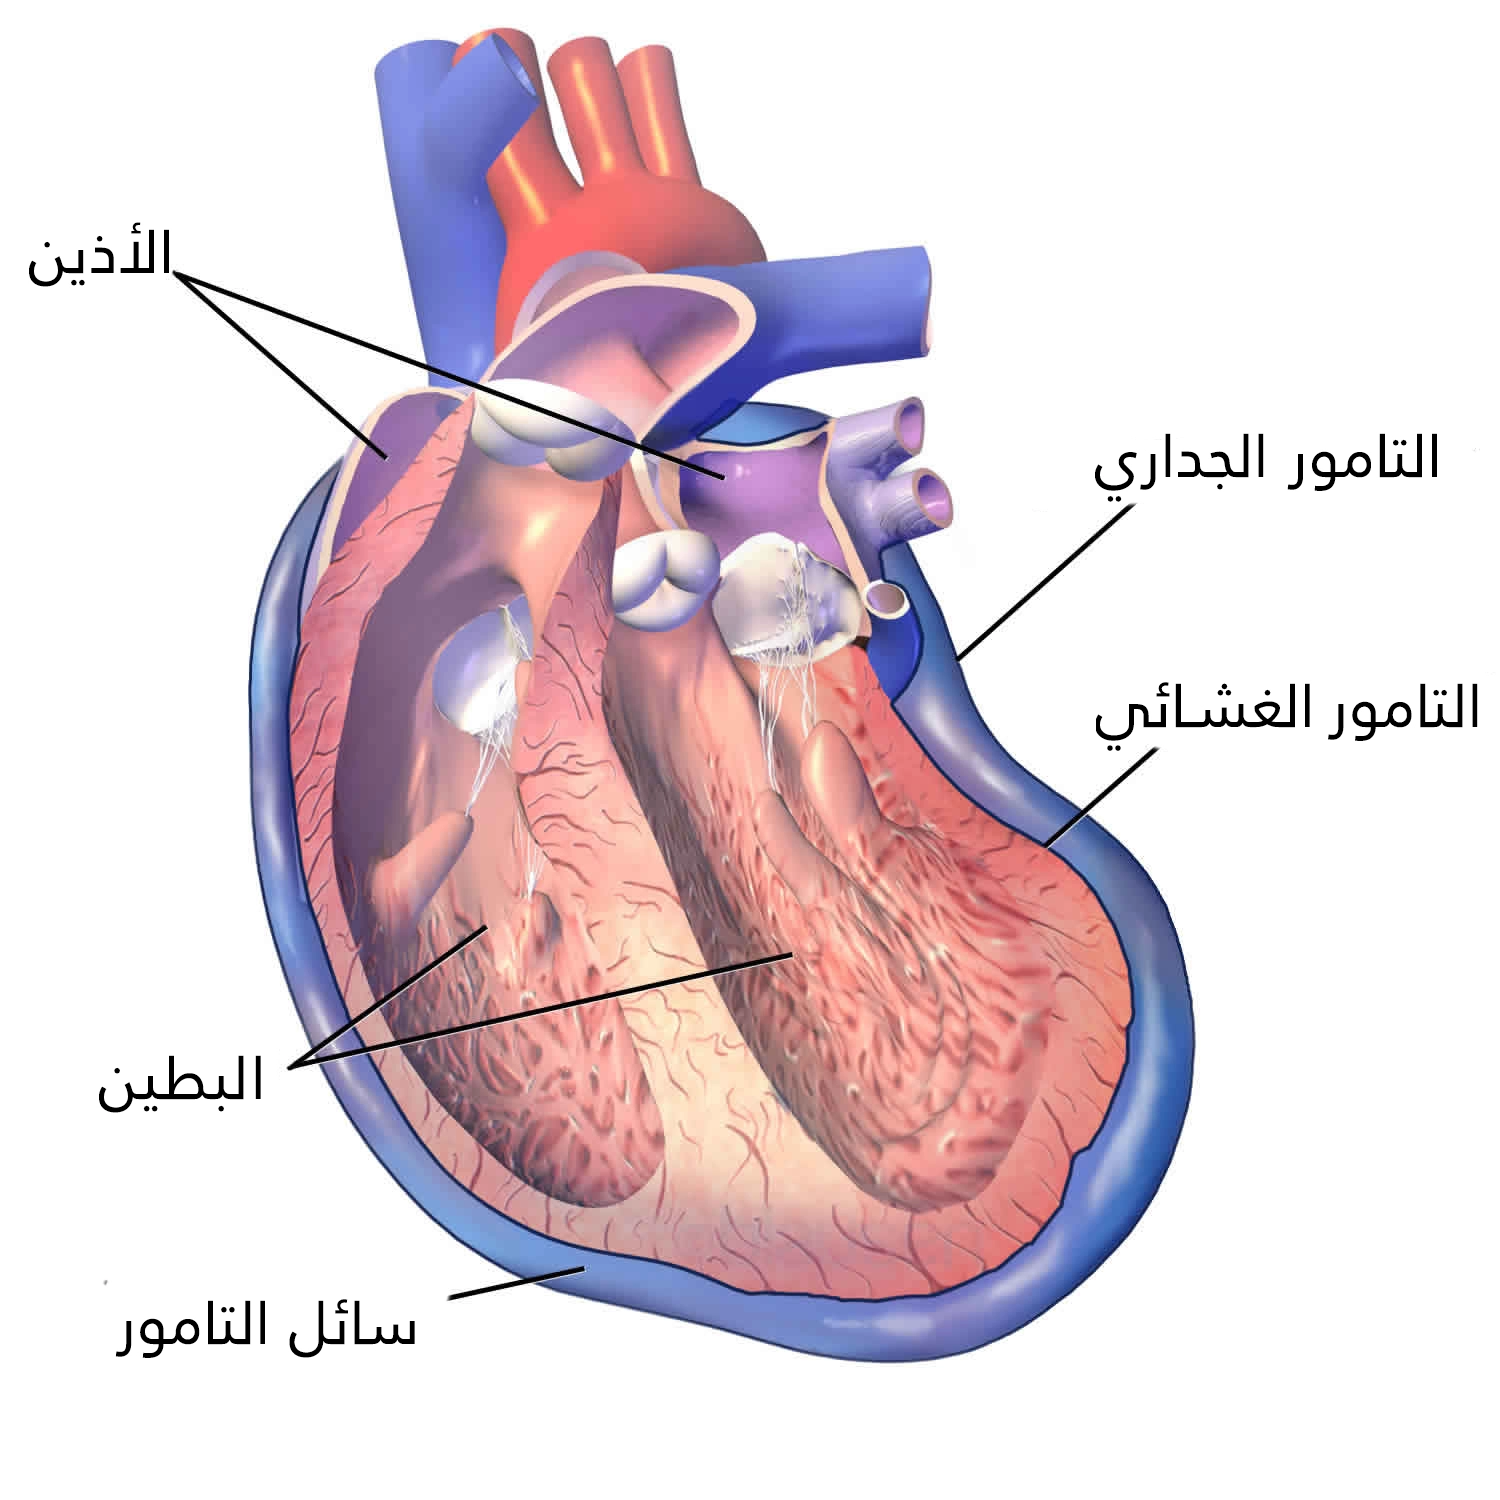 The pericardial sac is divided into an inner layer called the membranous pericardium and an outer layer called the parietal pericardium